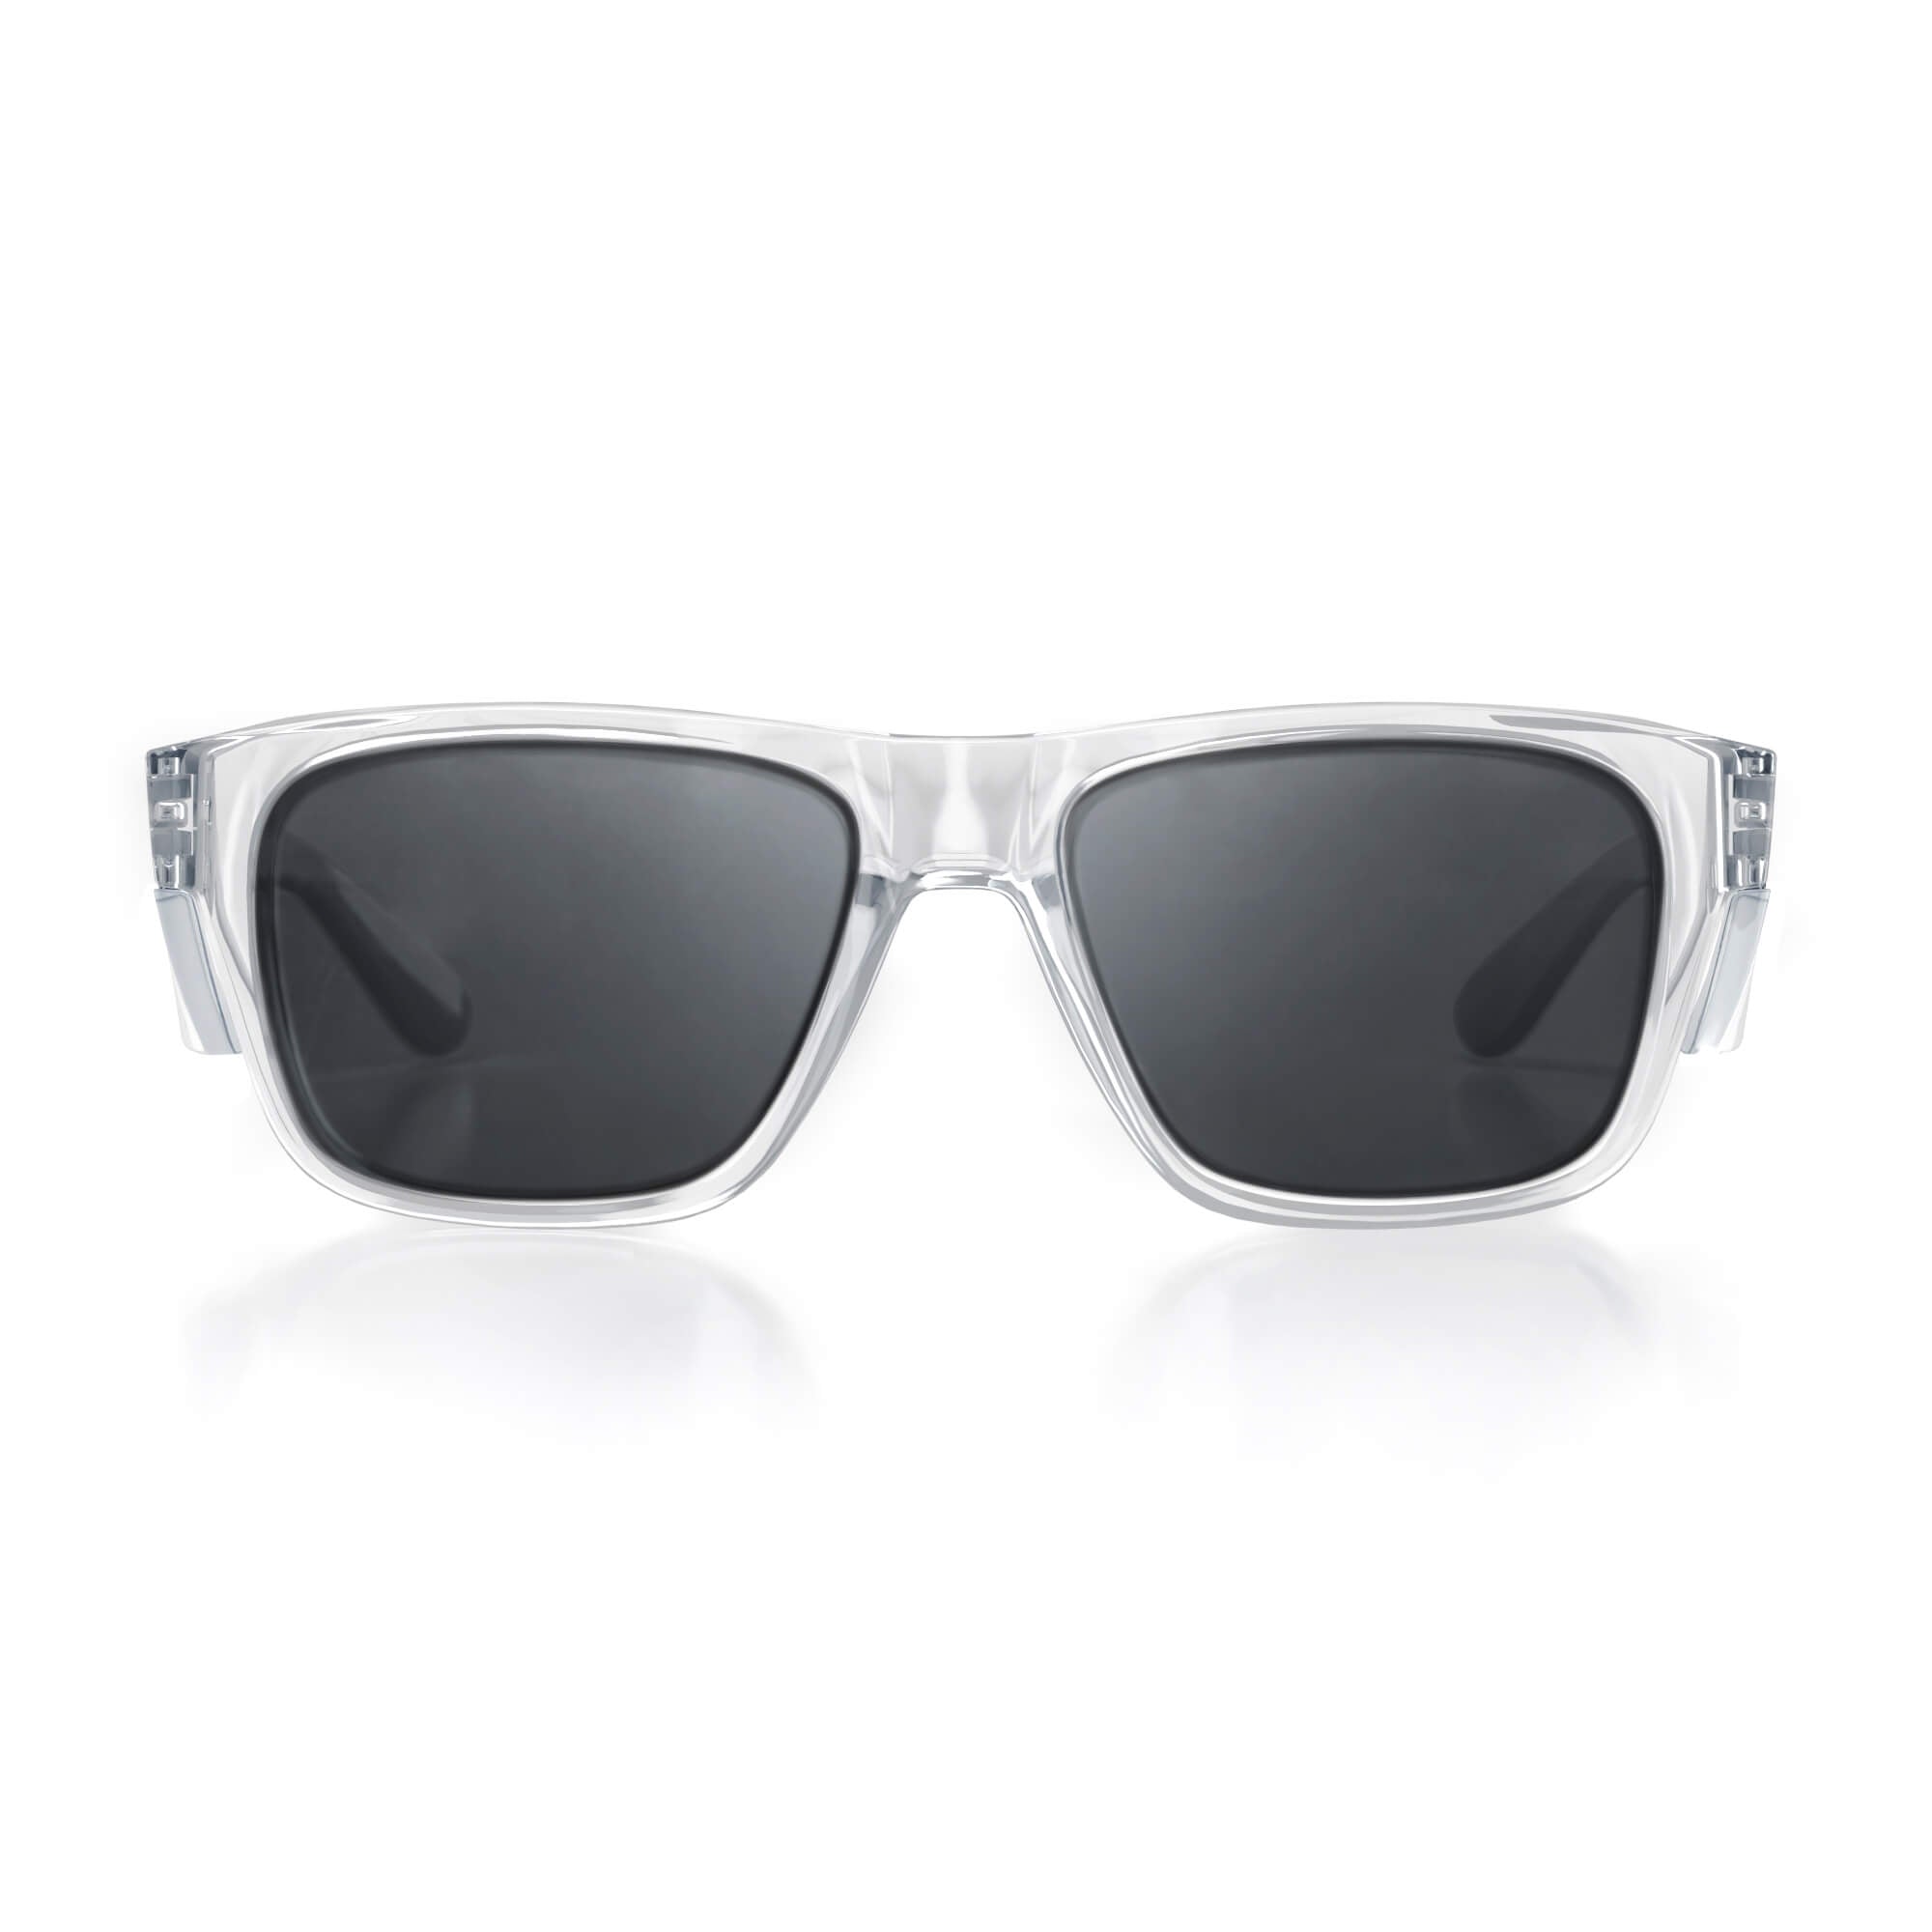 SafeStyle Fusions Clear Frame/Polarised Lens glasses